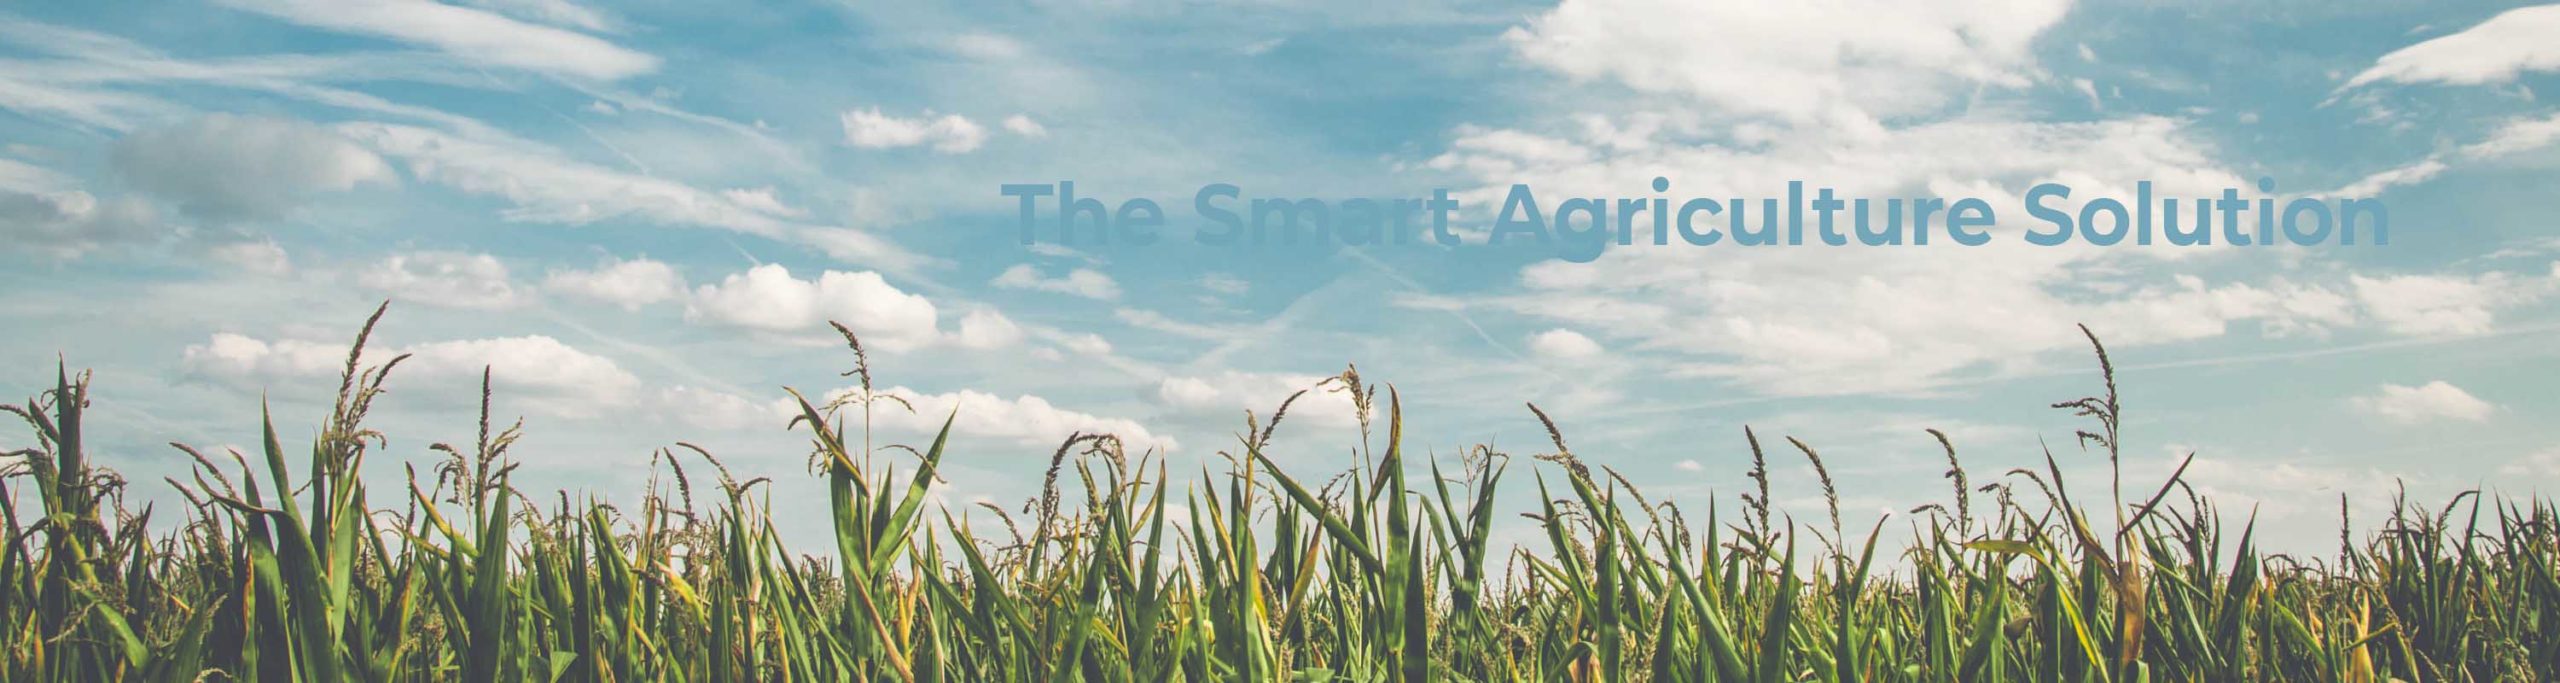 The NGA Smart Agriculture Solution